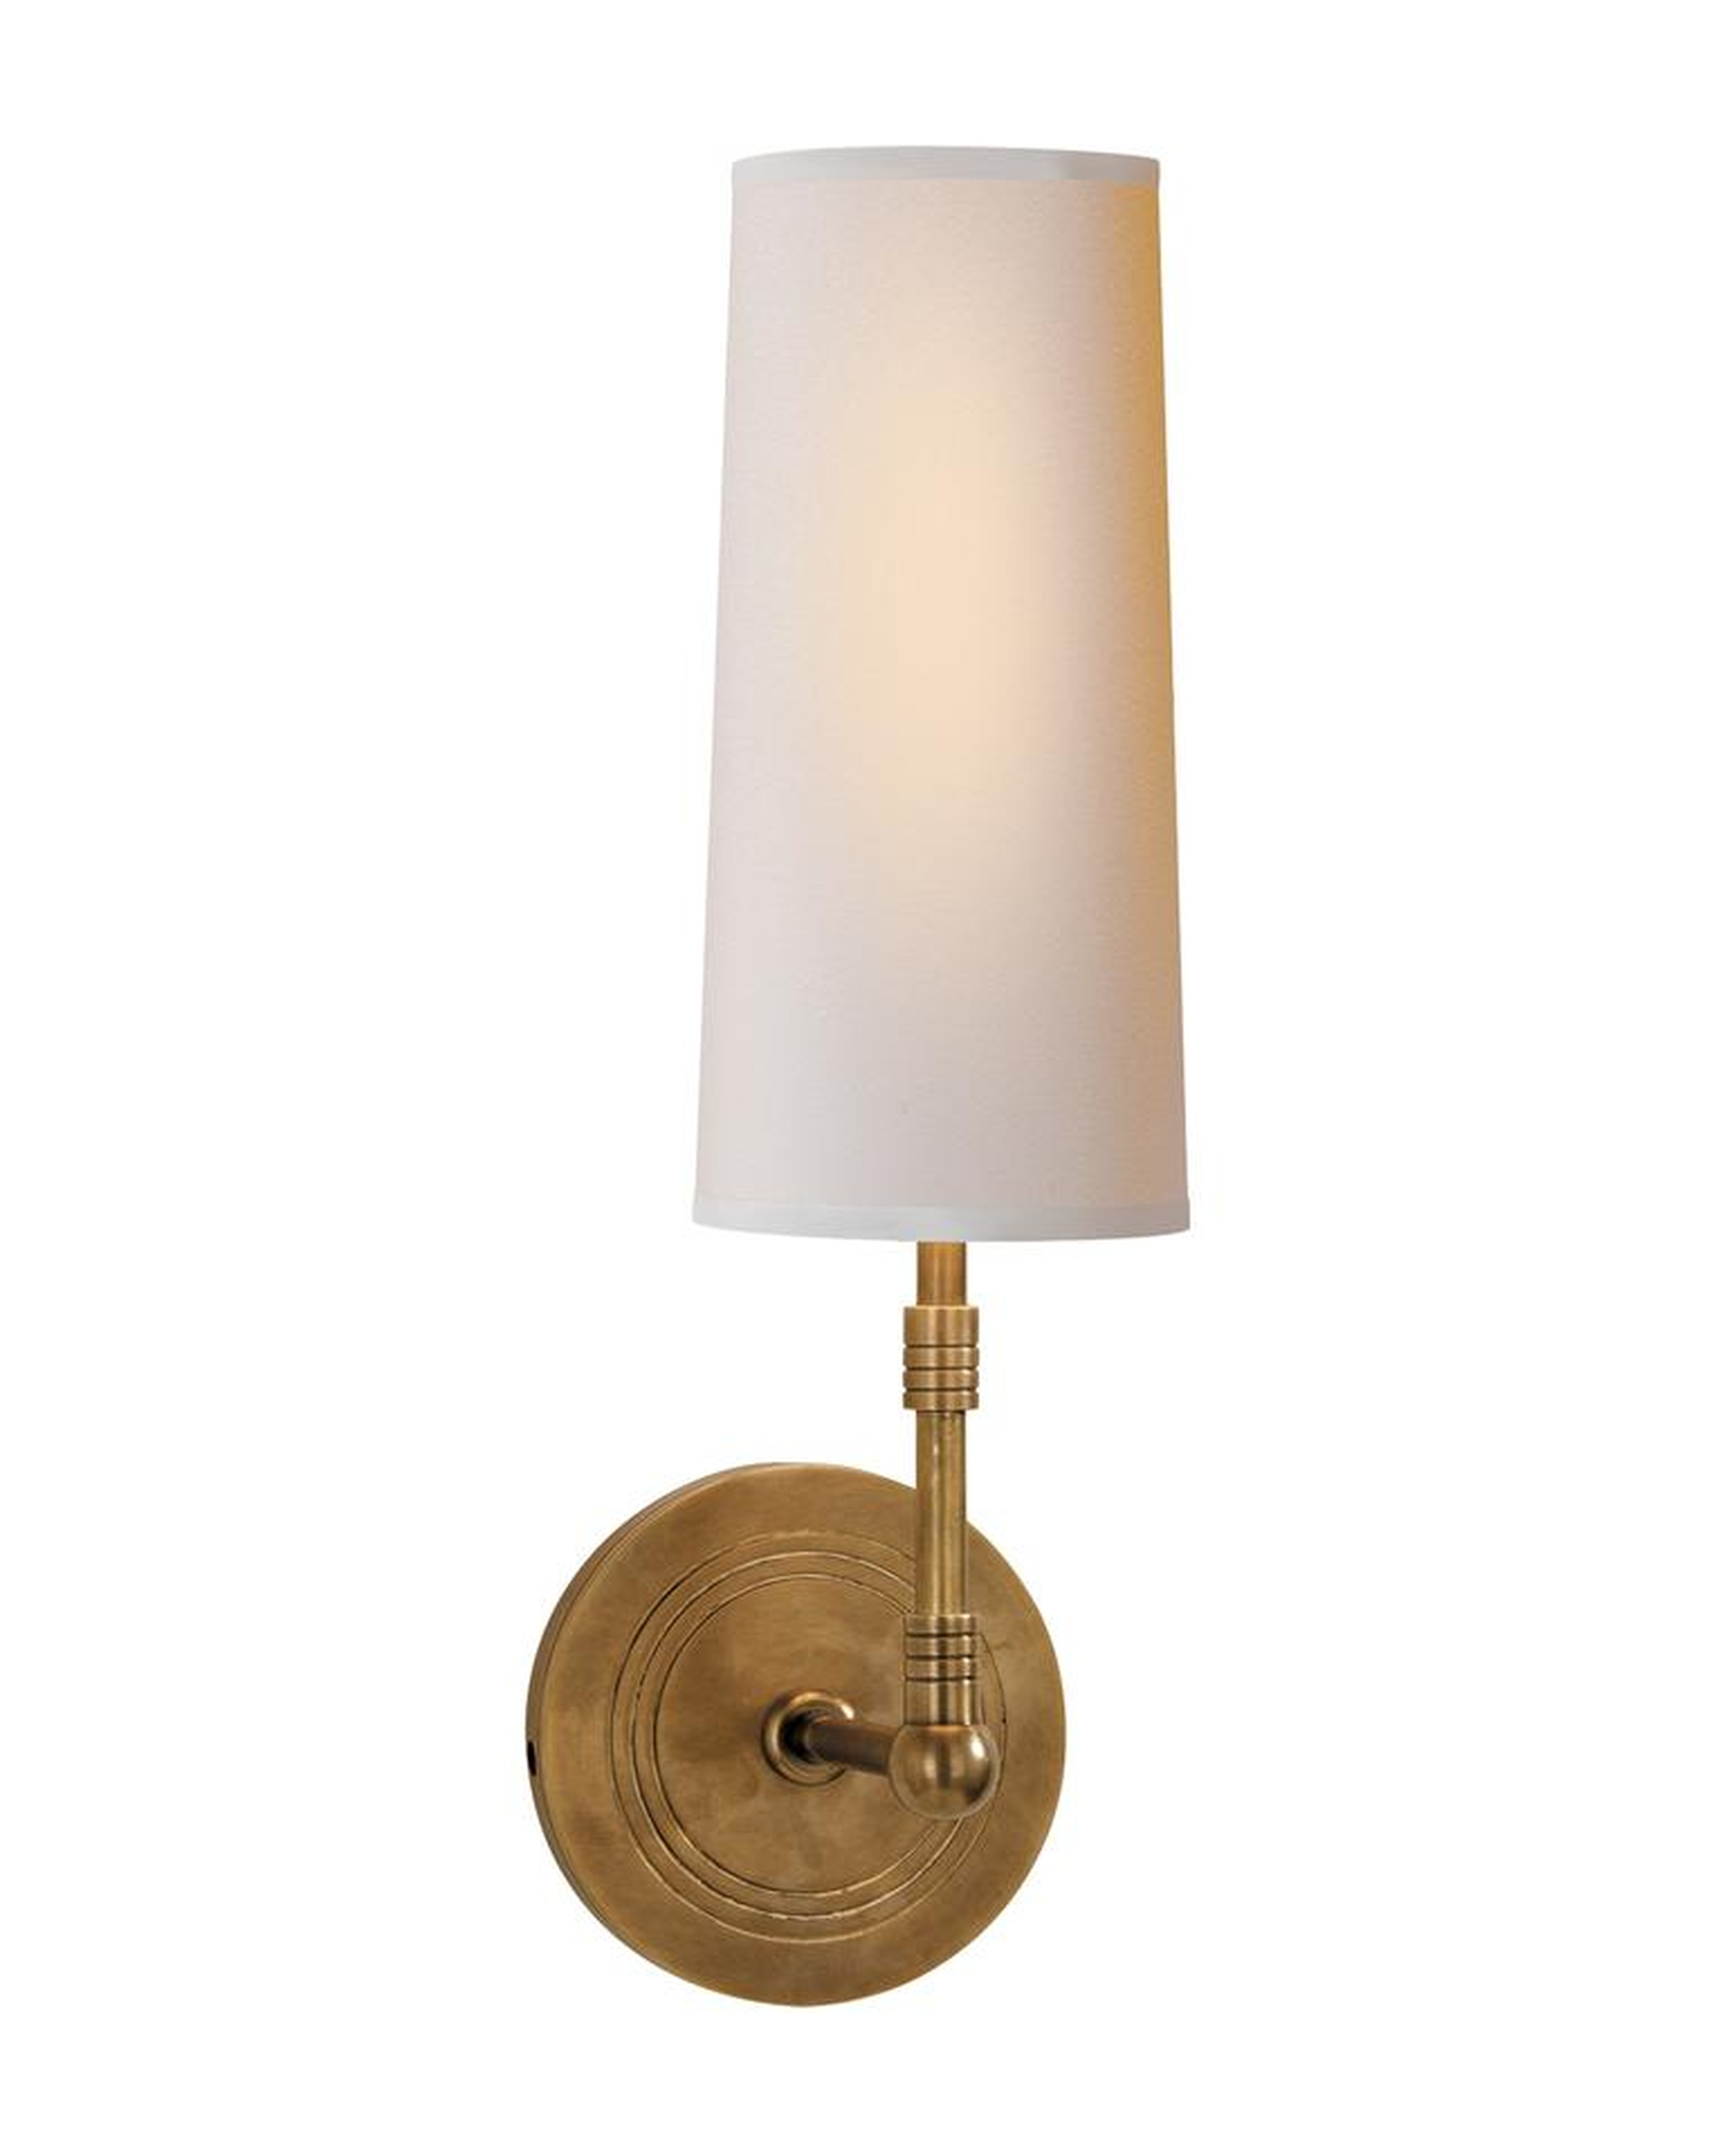 ZIYI SCONCE - HAND-RUBBED ANTIQUE BRASS - McGee & Co.